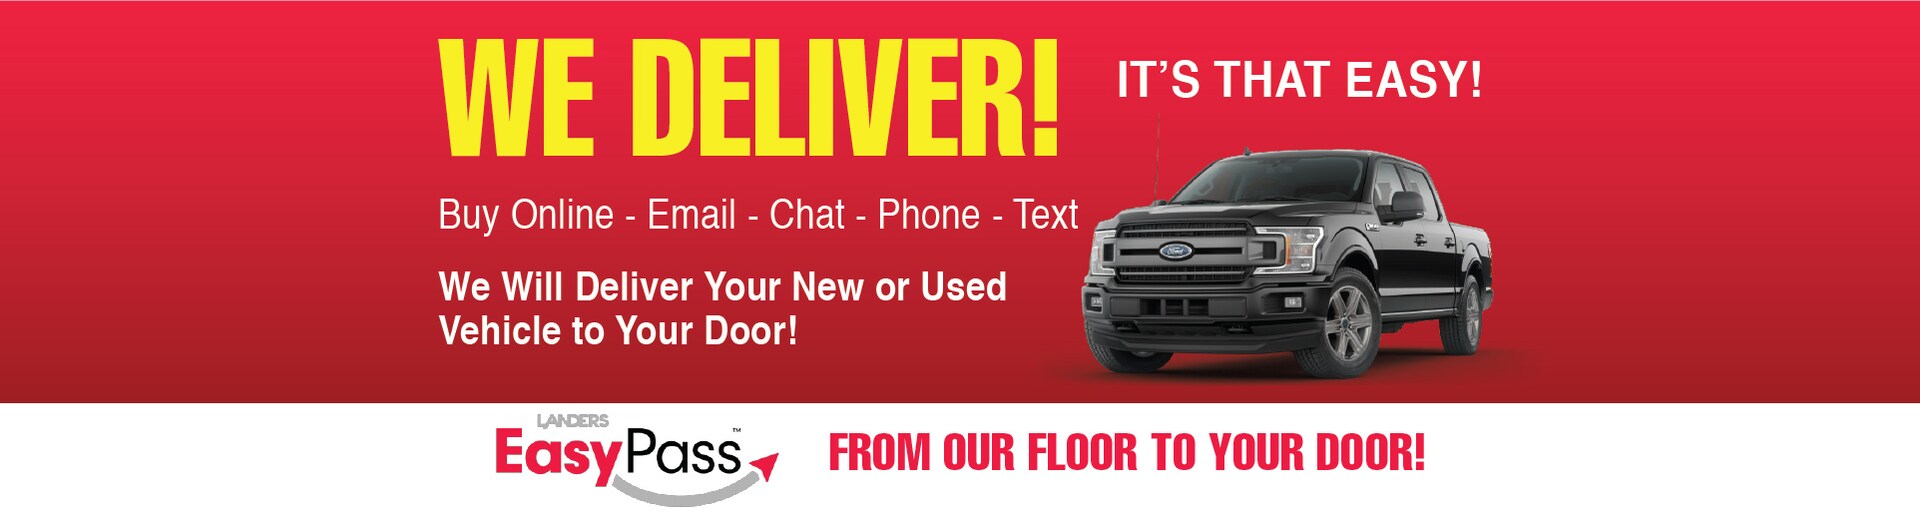 Landers Ford South Ford Dealership In Southaven Ms